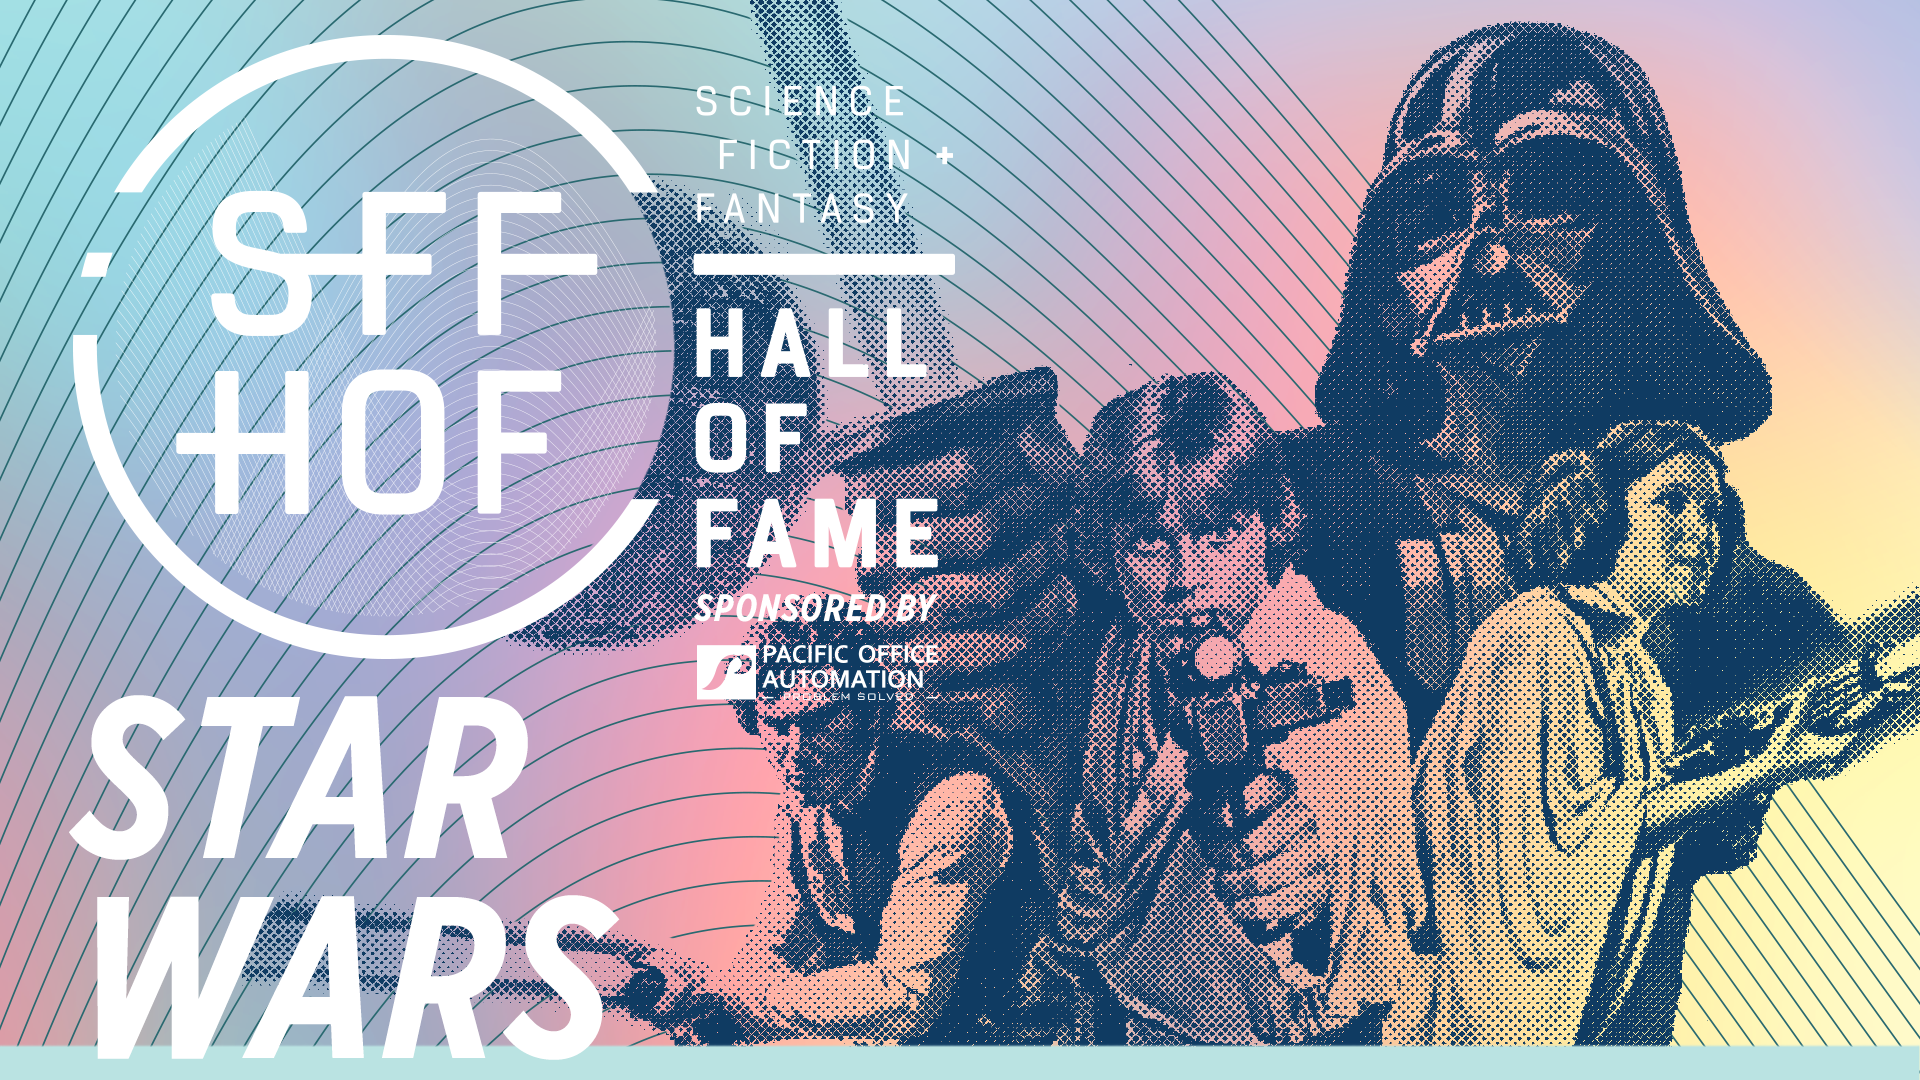 MoPOP Science Fiction + Fantasy Hall of Fame inductee graphic for Star Wars